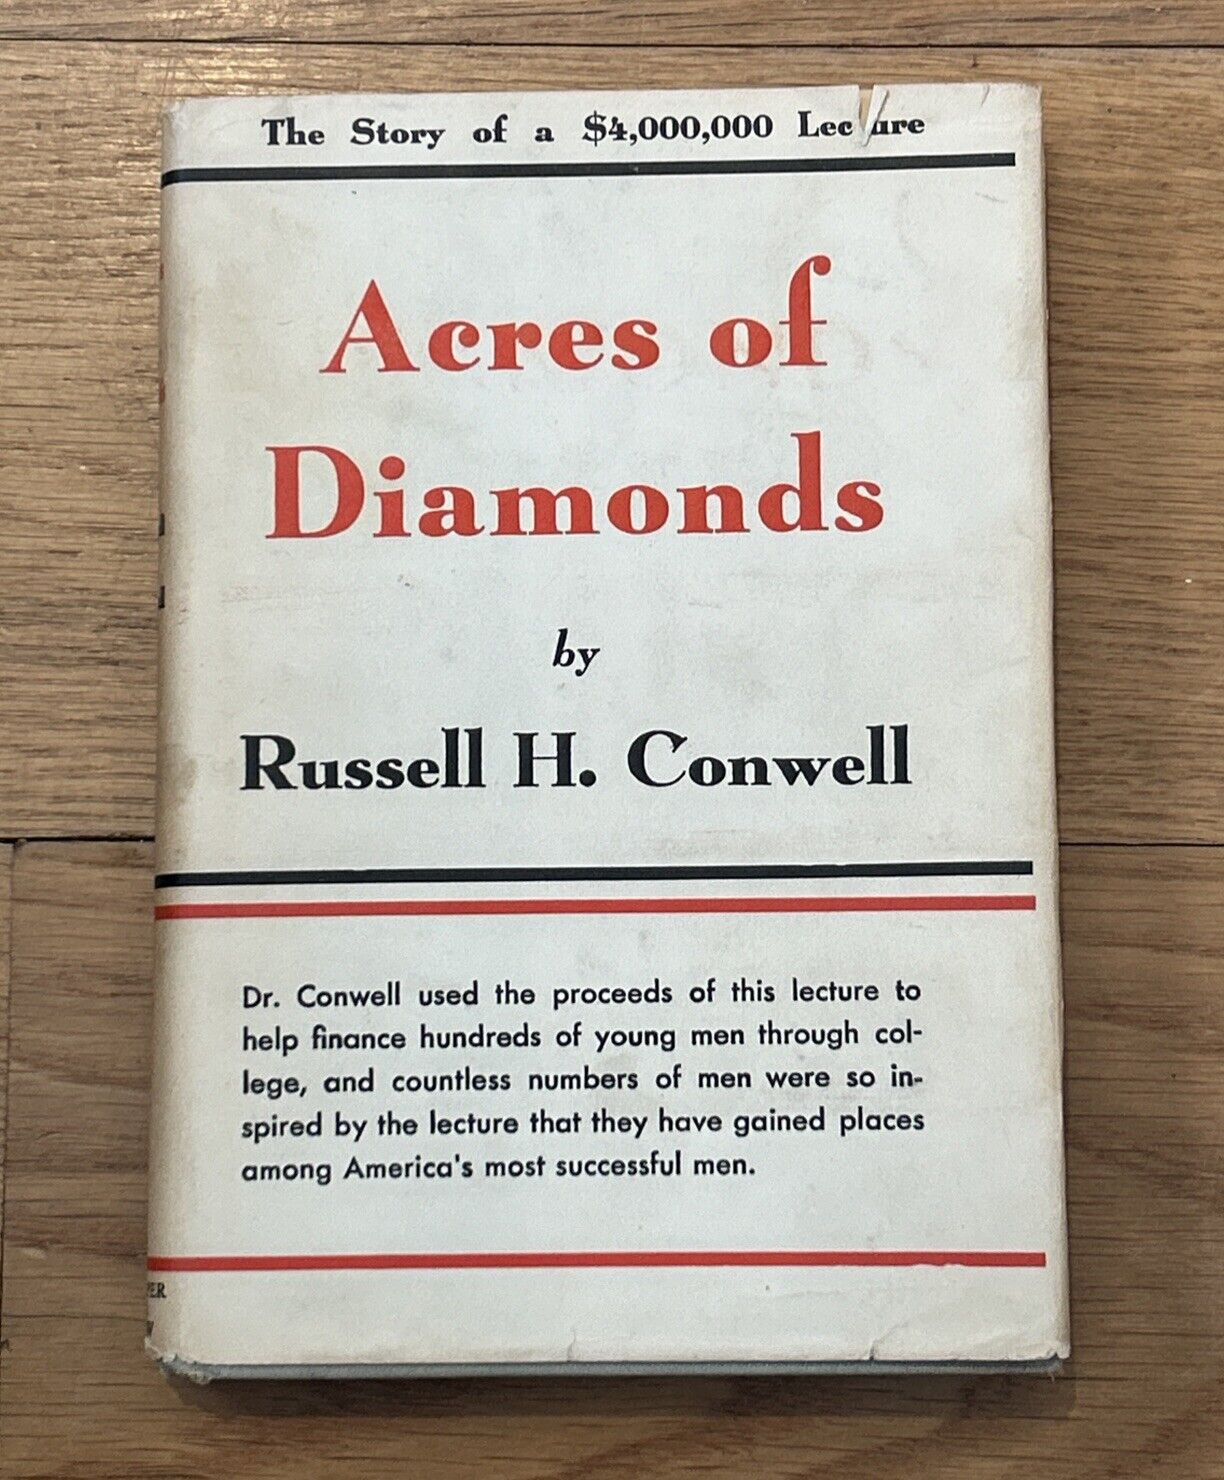 Acres of Diamonds by Russell H Conwell w/ Robert Shackleton. 1943 edition, HC DJ